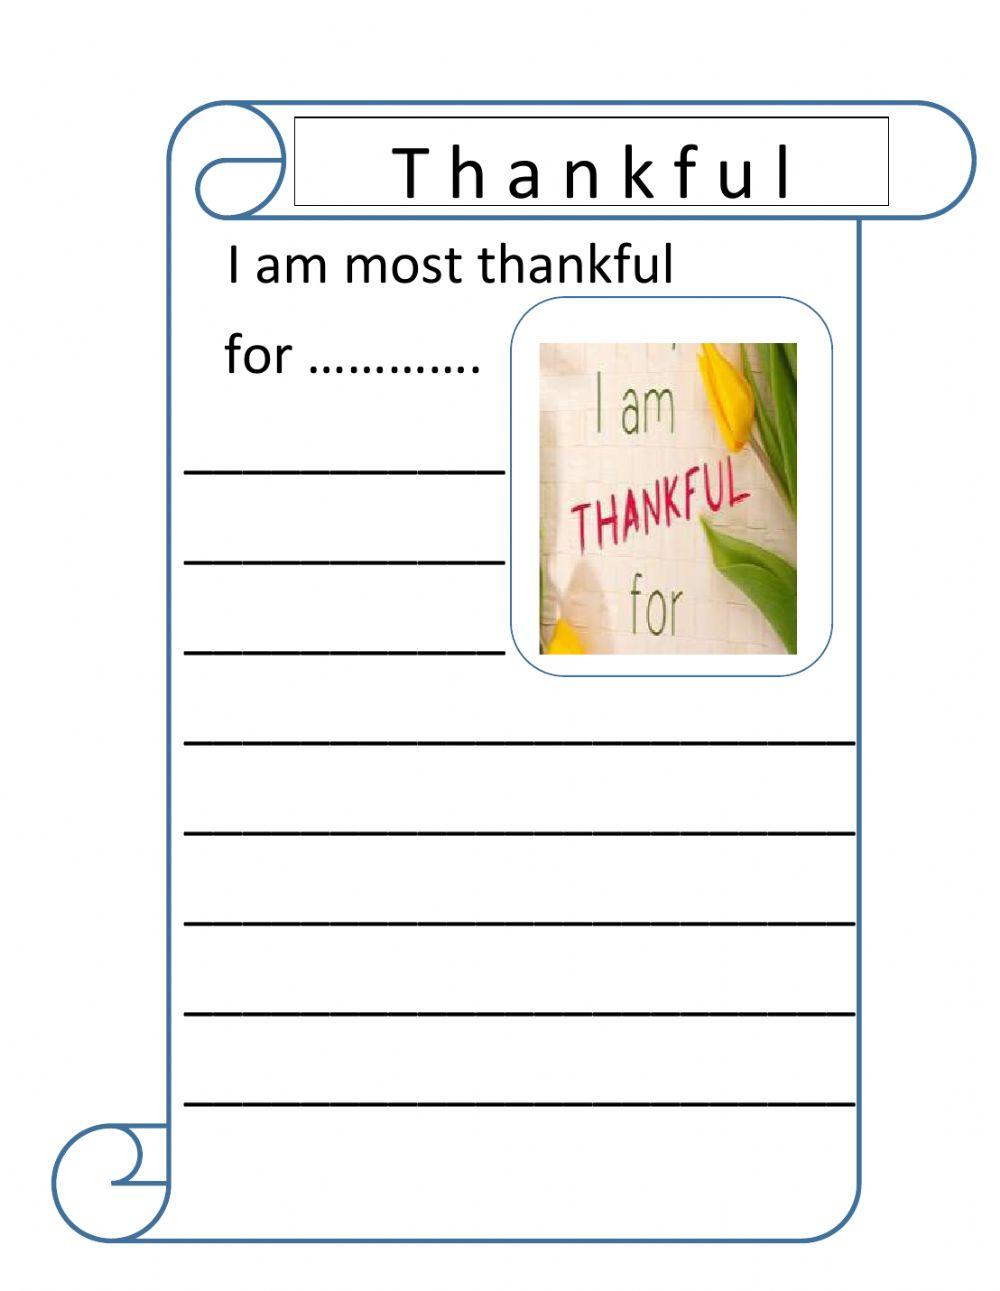 Introduction - I am Thankful For......